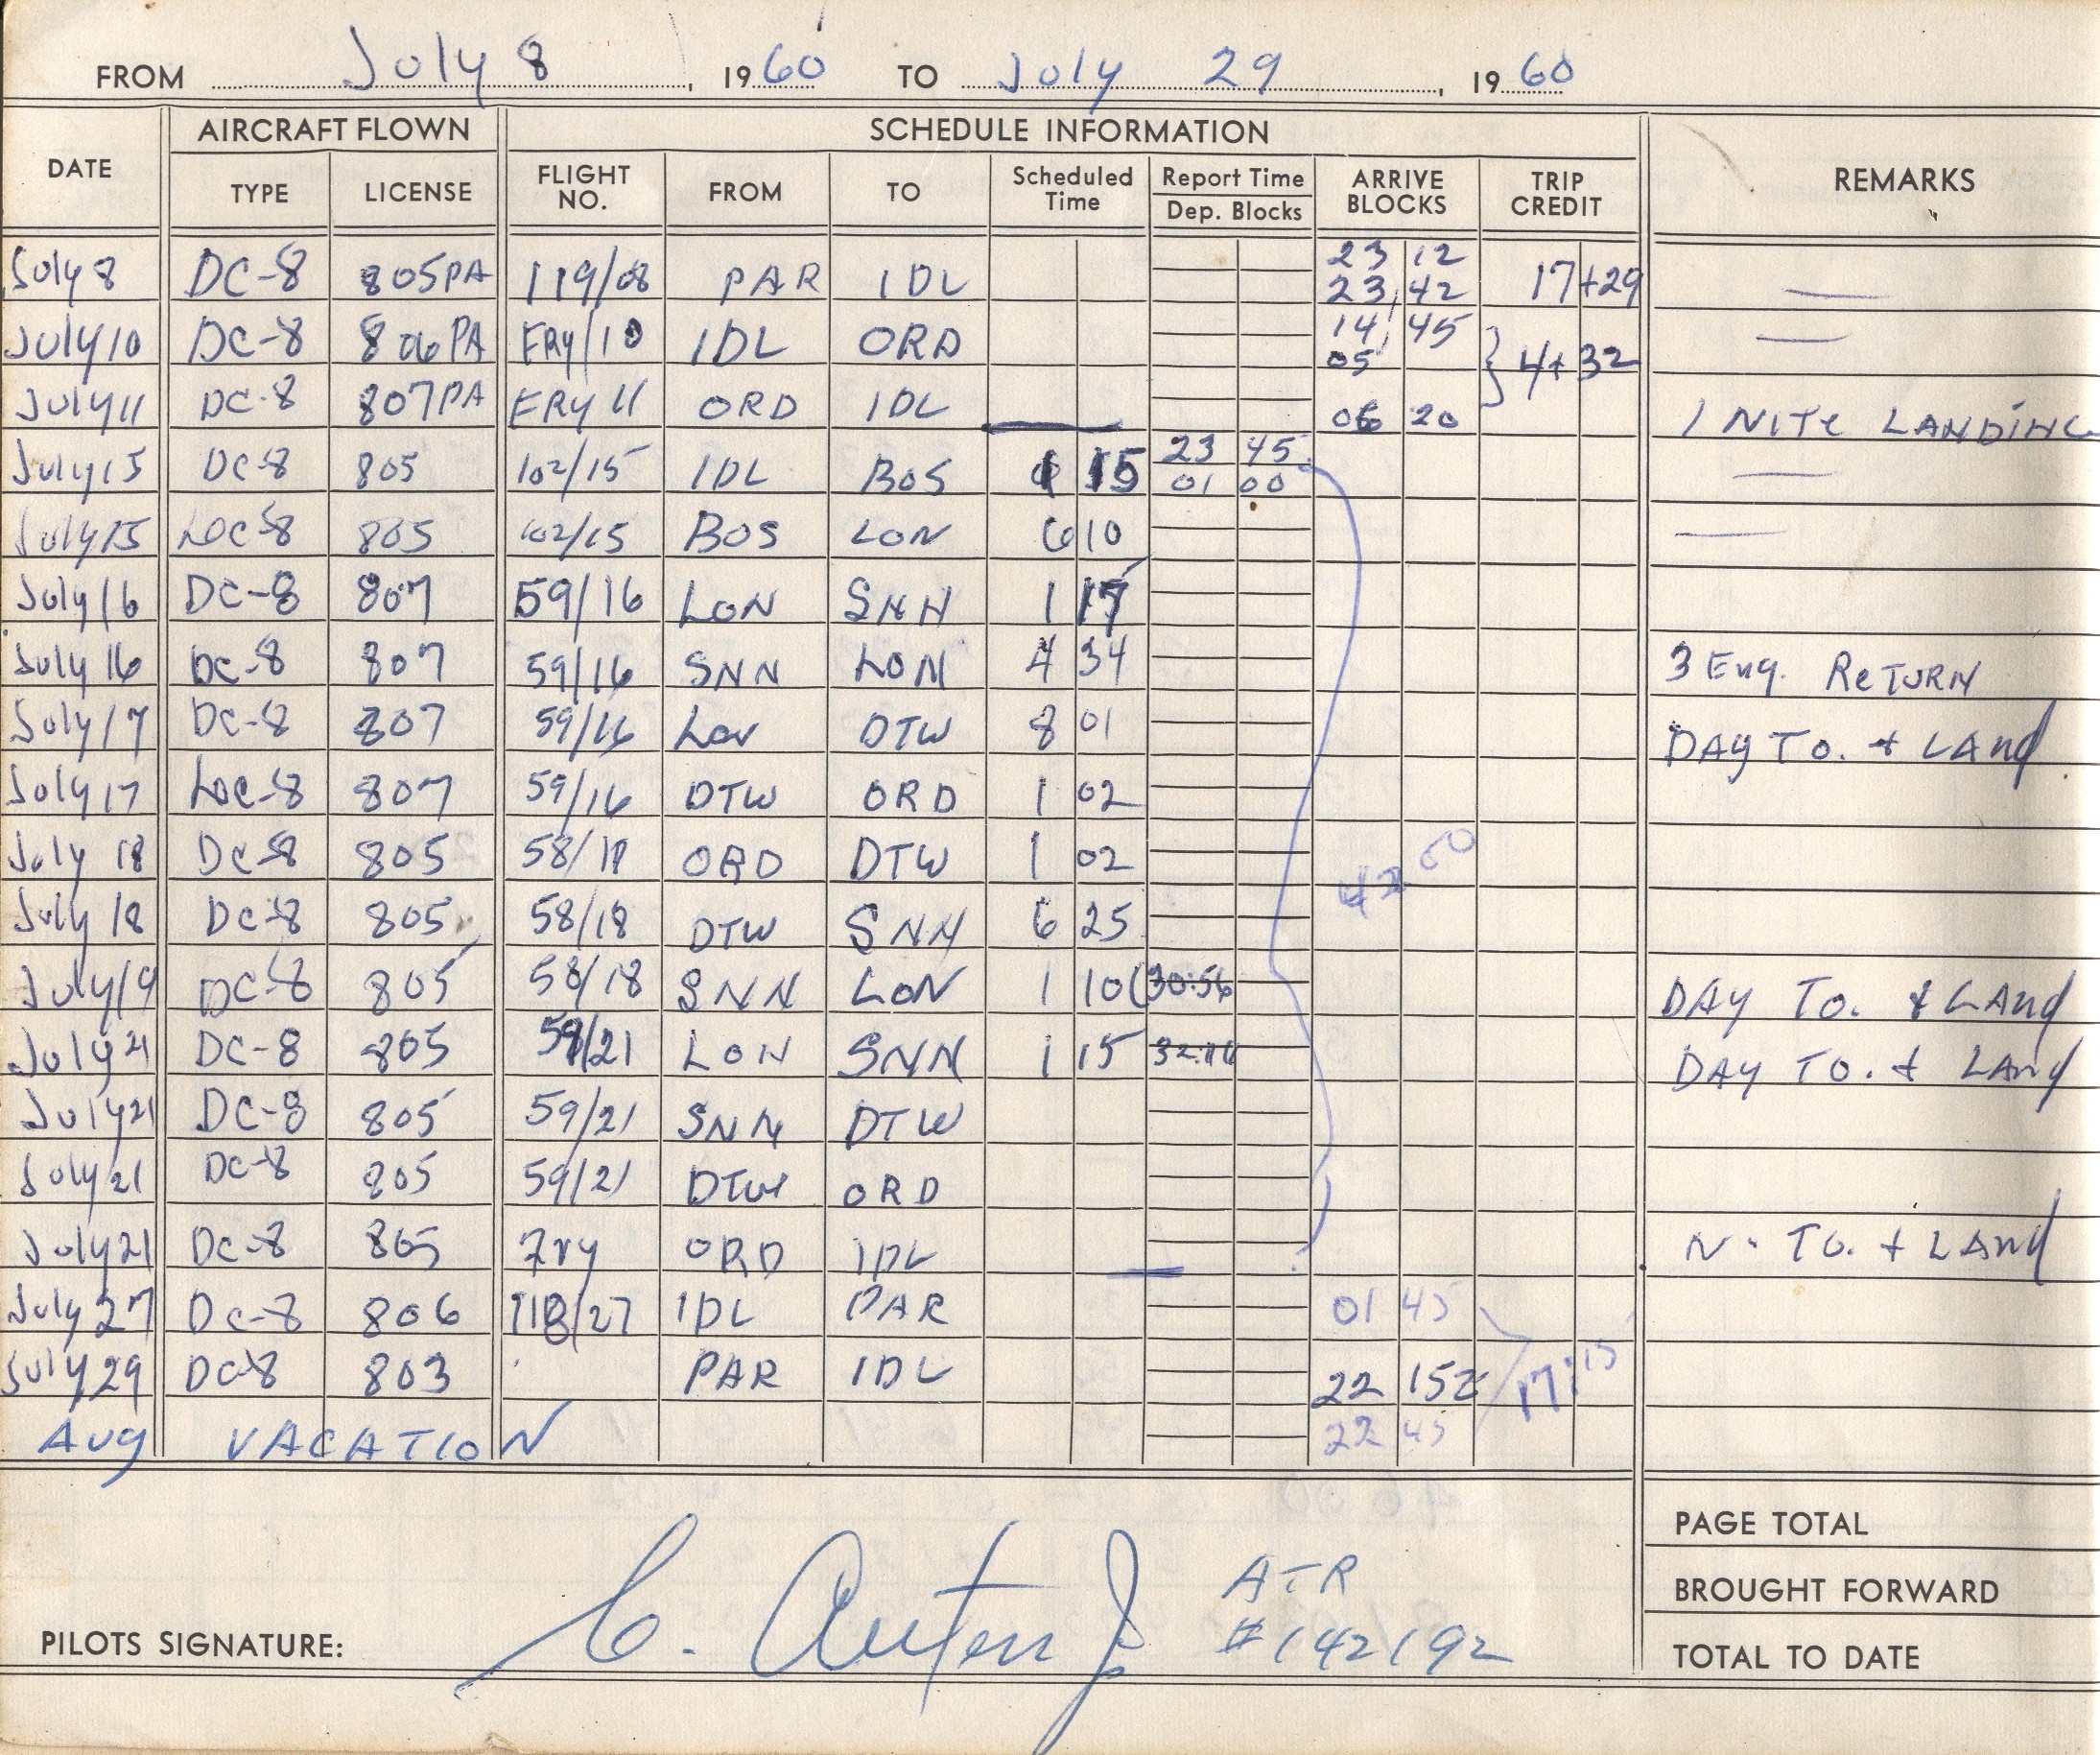 1960  July 8 - 29 log book page.  This shows Pan Am's service from both Detroit & Chicago to Ireland & England.